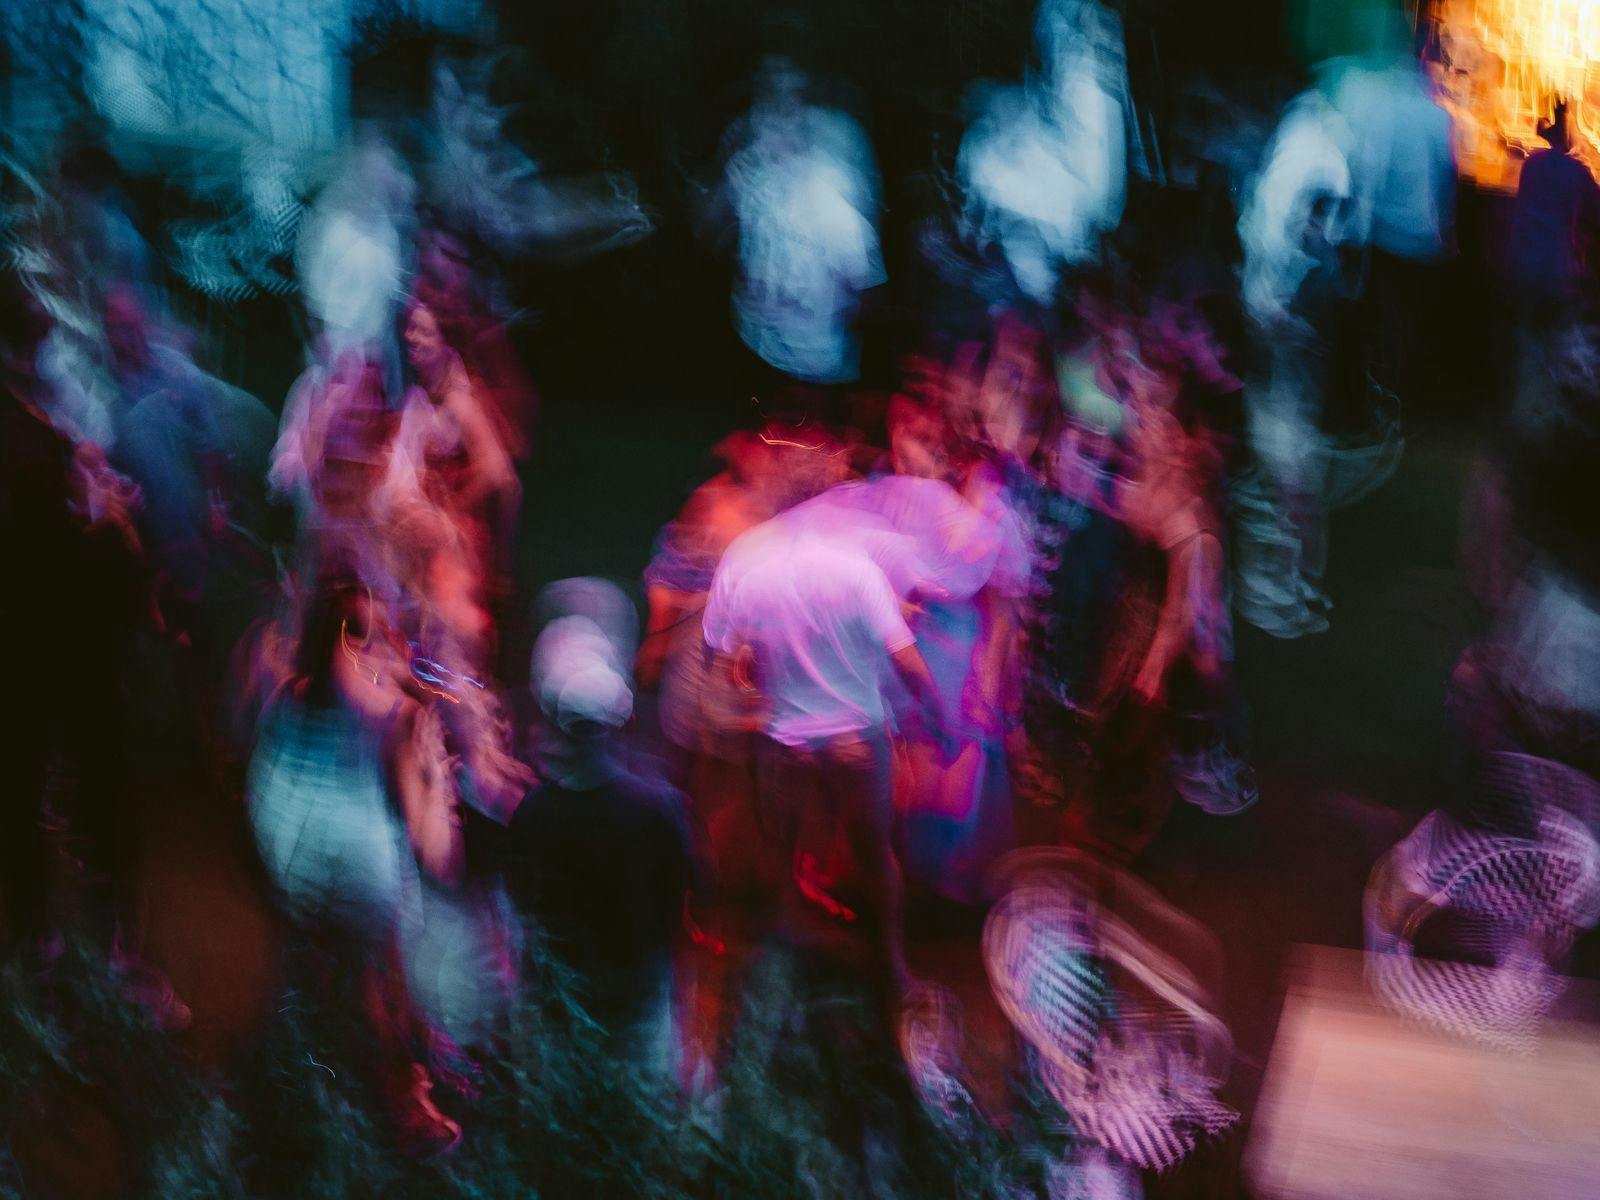 A highly blurred purple and blue image of a crowd of people.